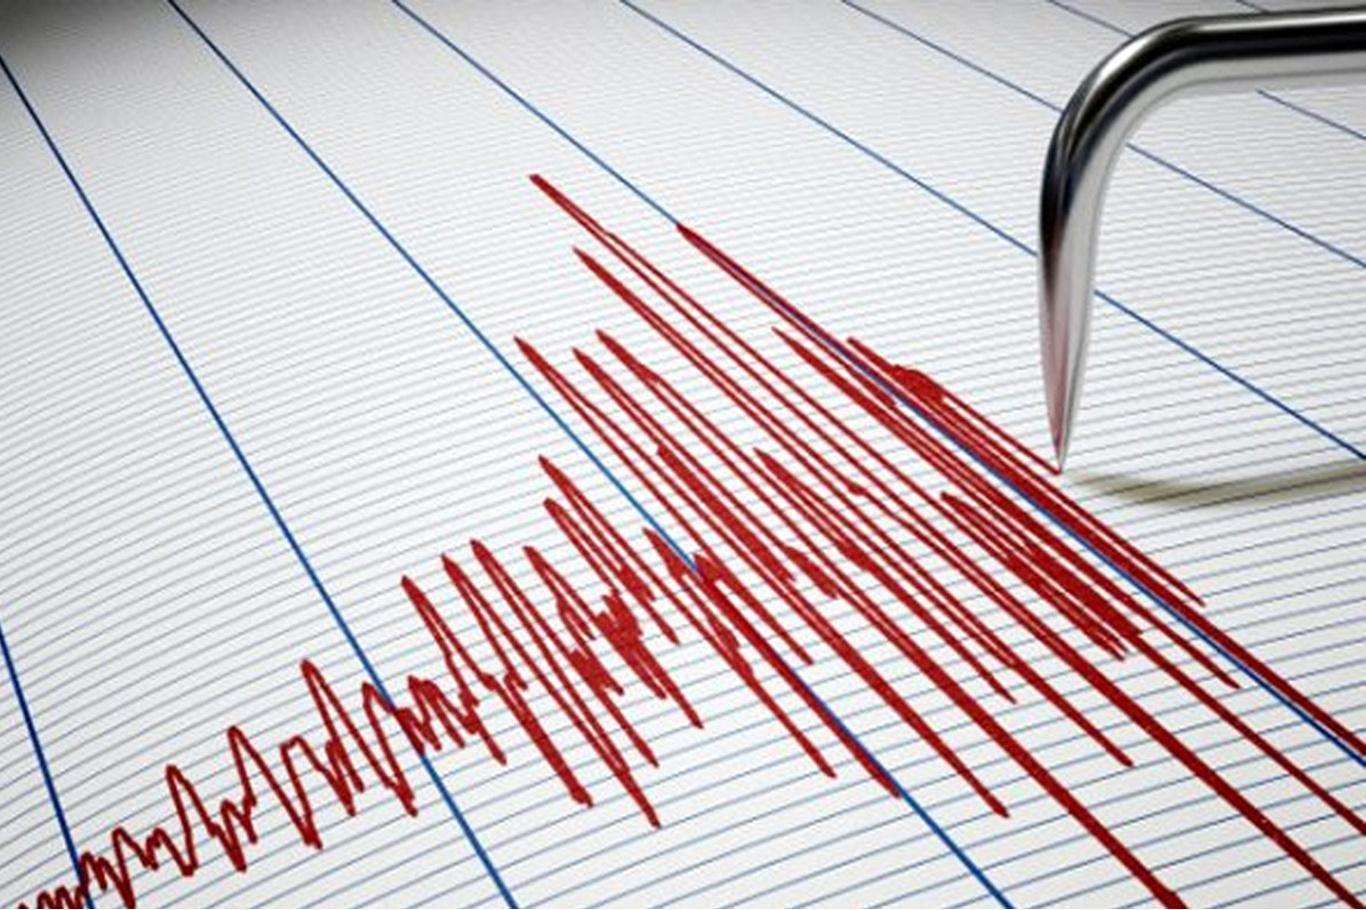 Magnitude-5.6 offshore earthquake occurs south of Honshu, Japan